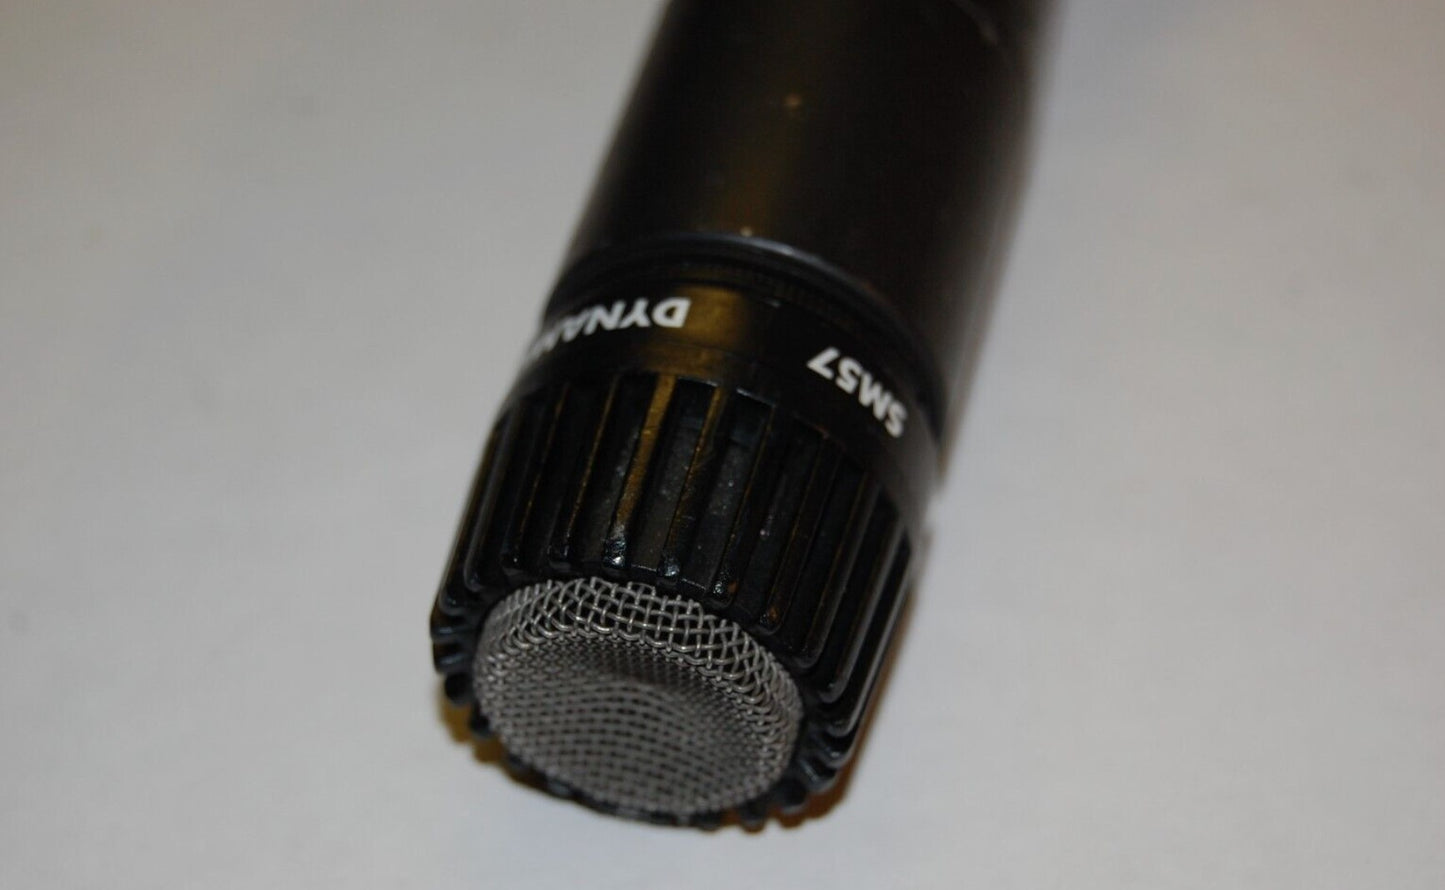 Used Shure SM 57 Instrument Microphones, Lot of 3, No Mic Clips, for Sale. We Sell Professional Audio Equipment. Audio Systems, Amplifiers, Consoles, Mixers, Electronics, Entertainment, Sound, Live.